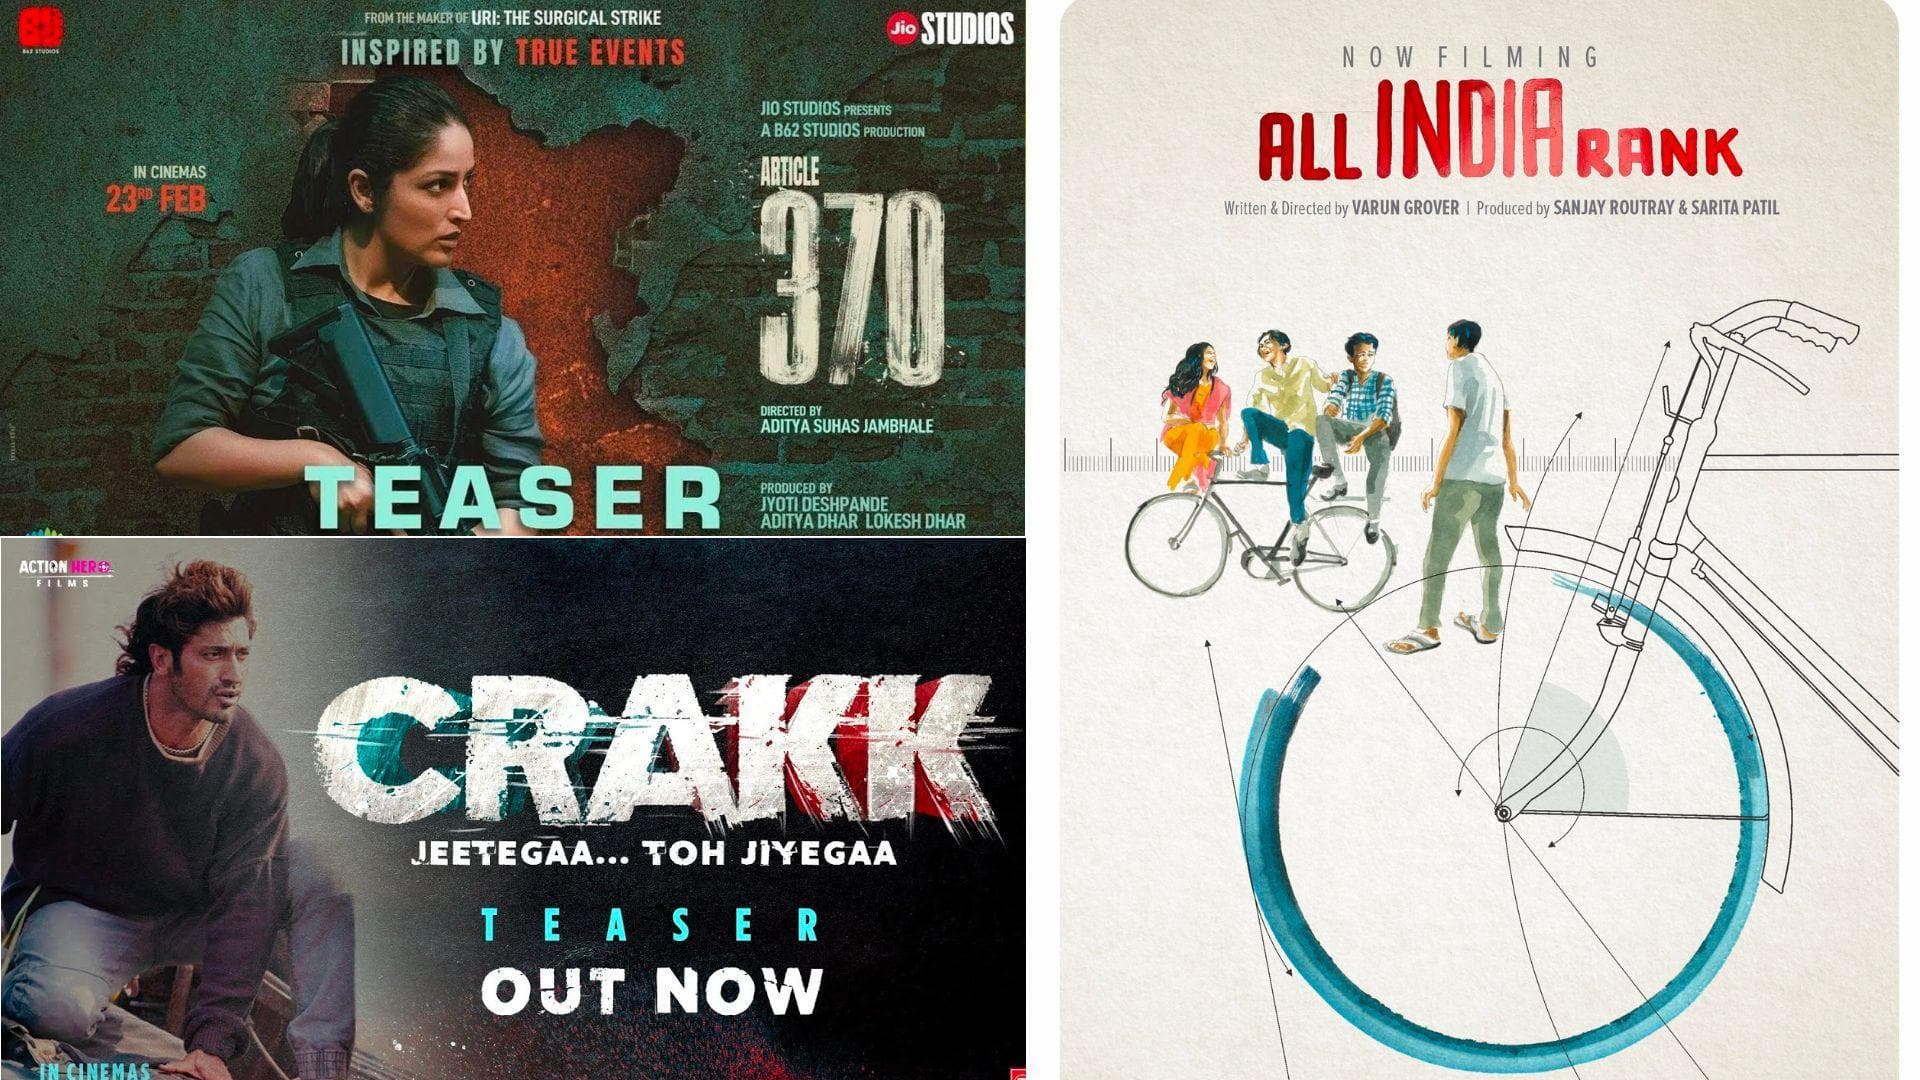 'Article 370,' 'Crakk': New movies releasing in theaters this Friday